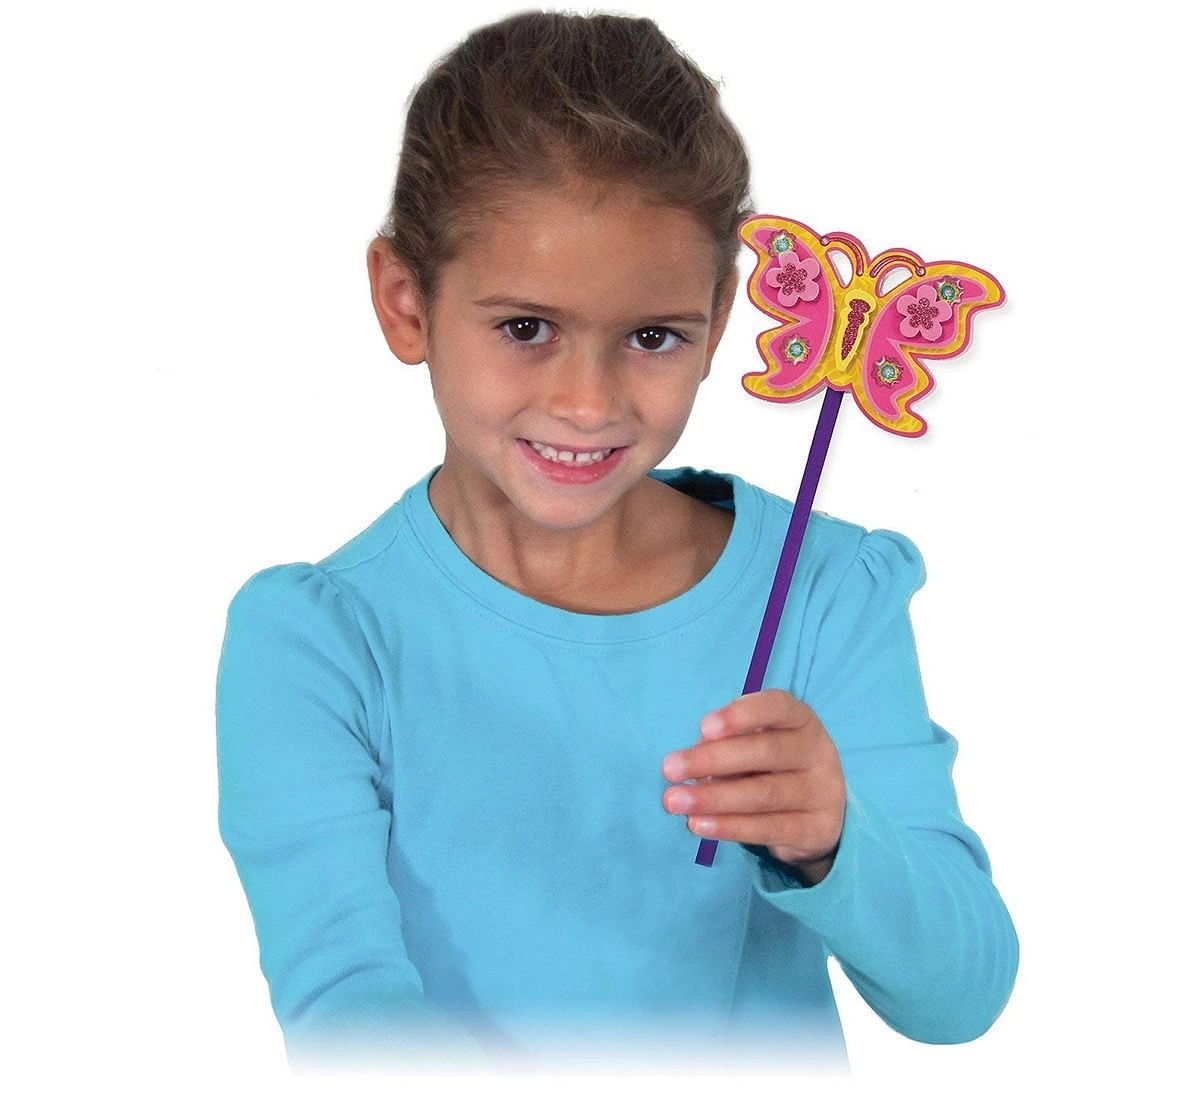 Melissa & Doug Simply Crafty - Whimsical Wands, Multi Color DIY Art & Craft Kits for Kids age 4Y+ 